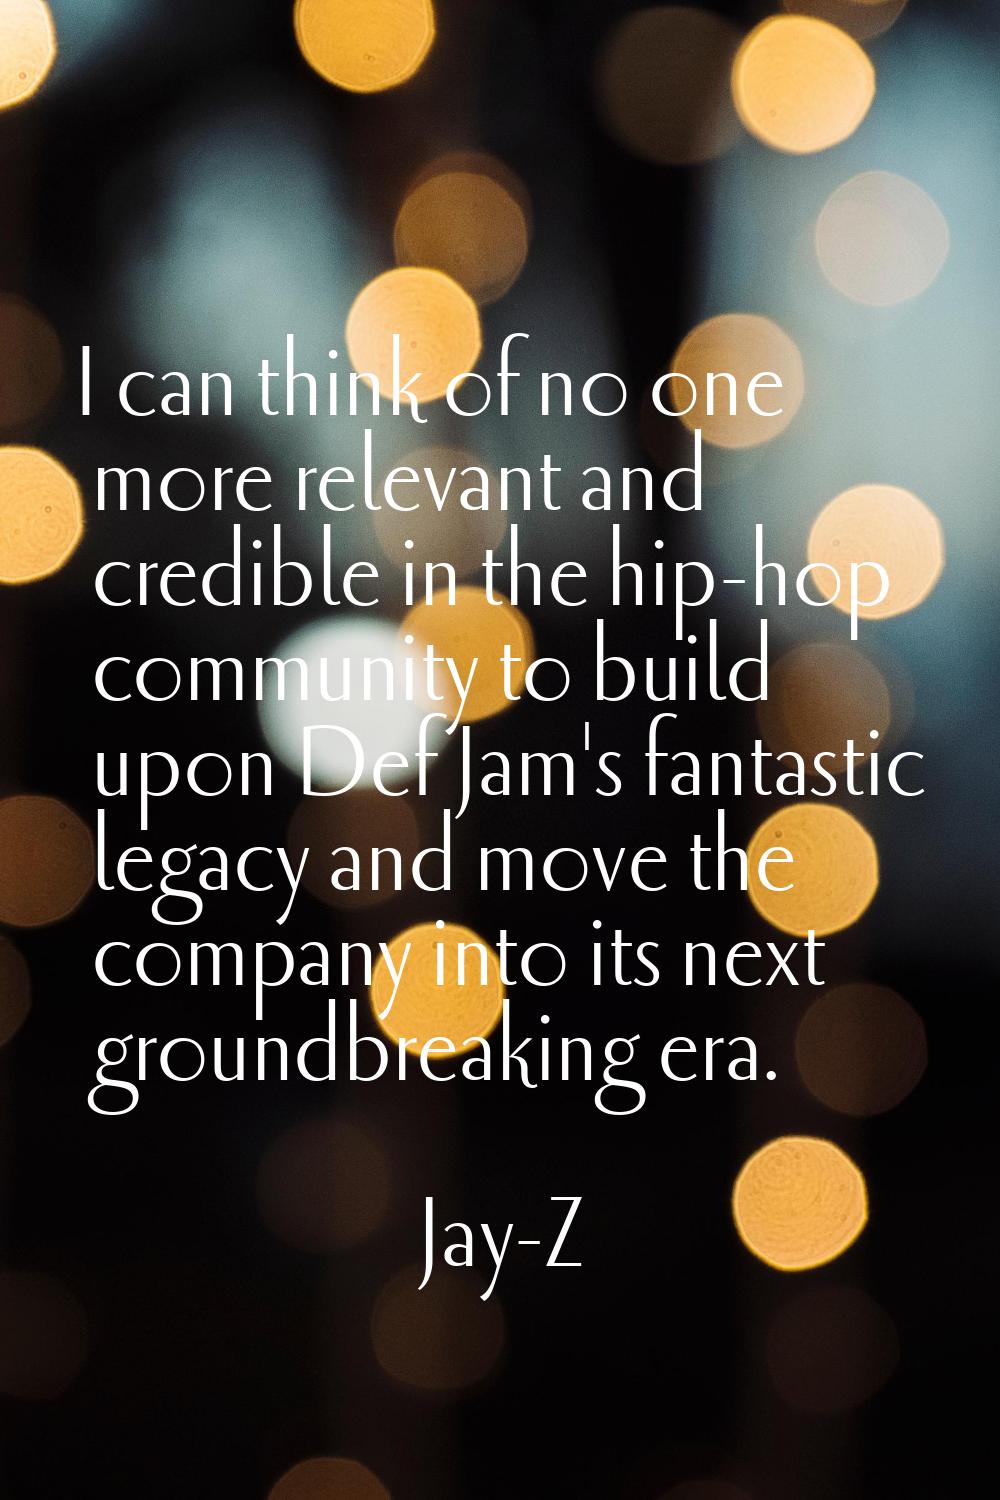 I can think of no one more relevant and credible in the hip-hop community to build upon Def Jam's f